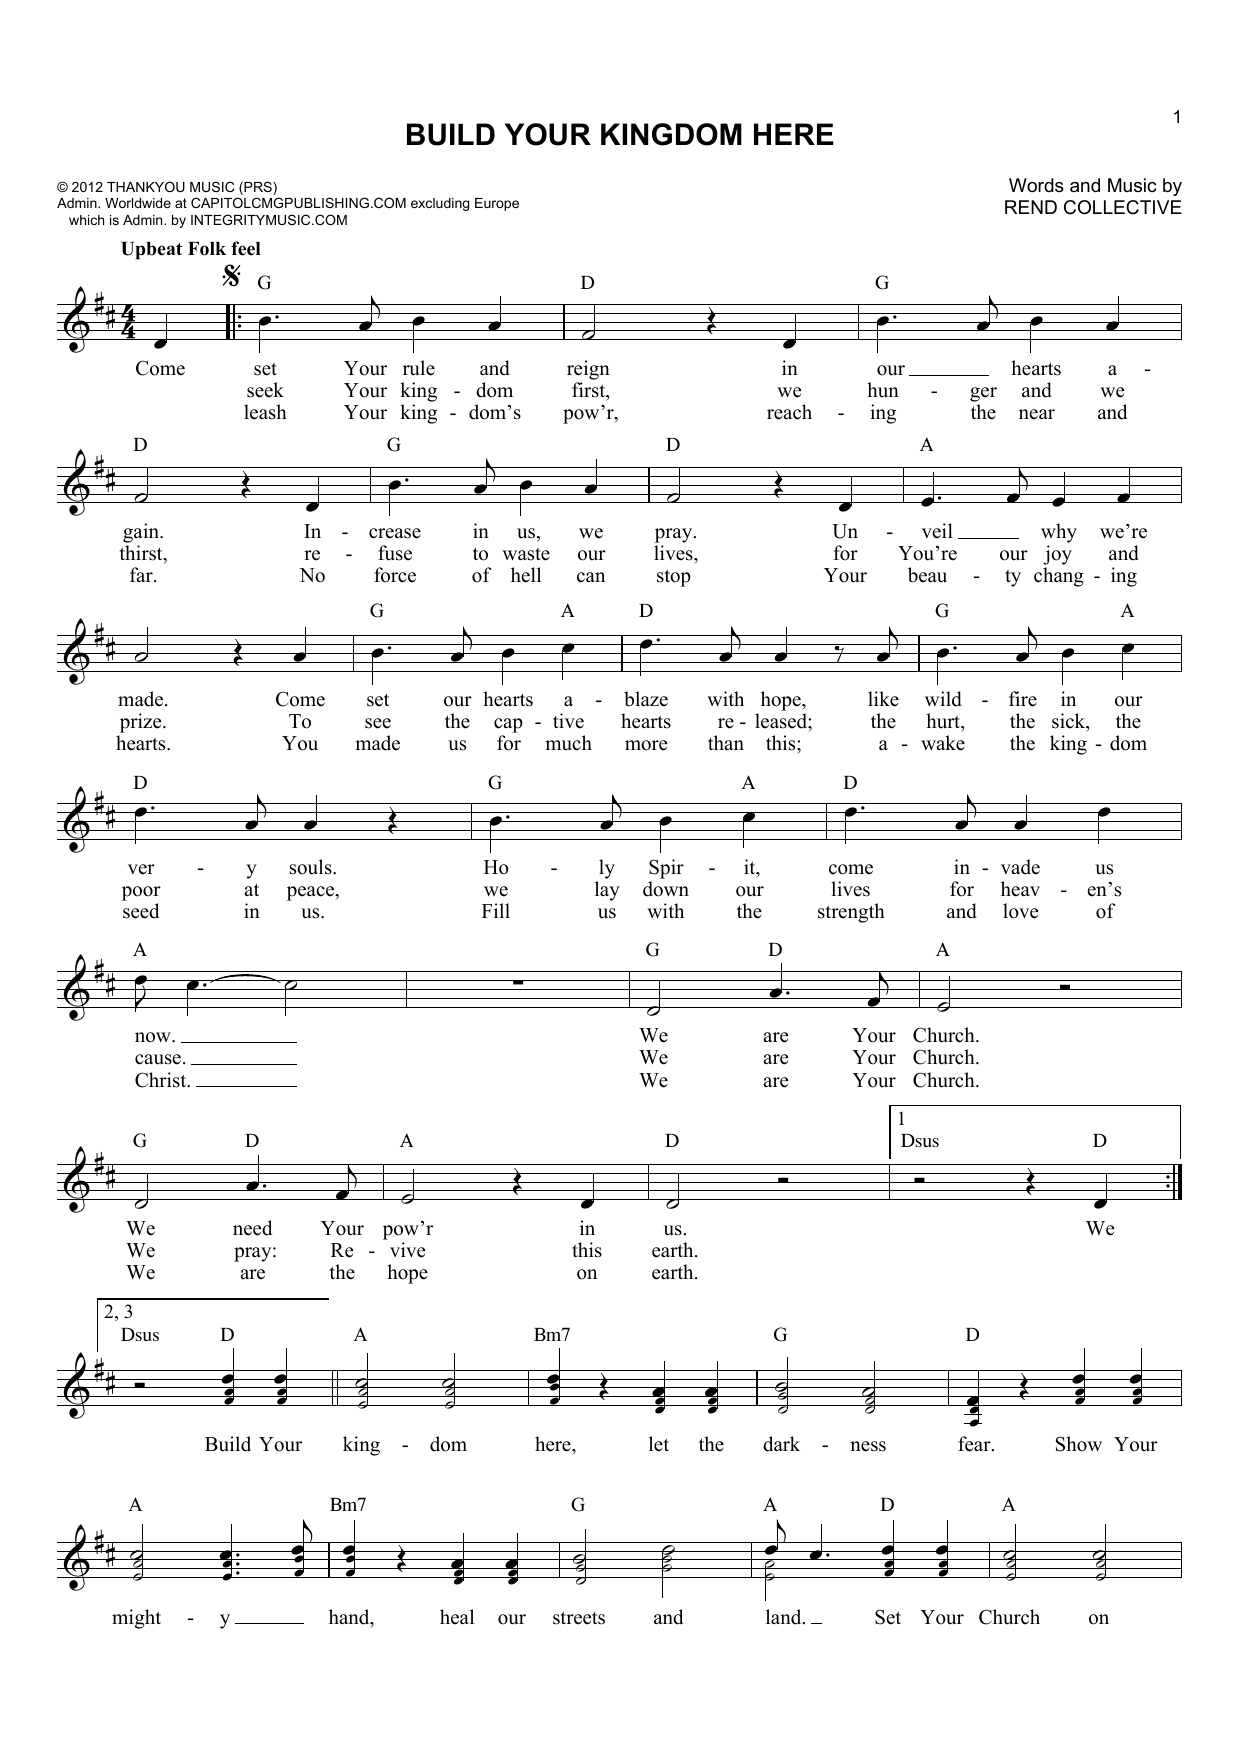 Download Rend Collective Build Your Kingdom Here Sheet Music